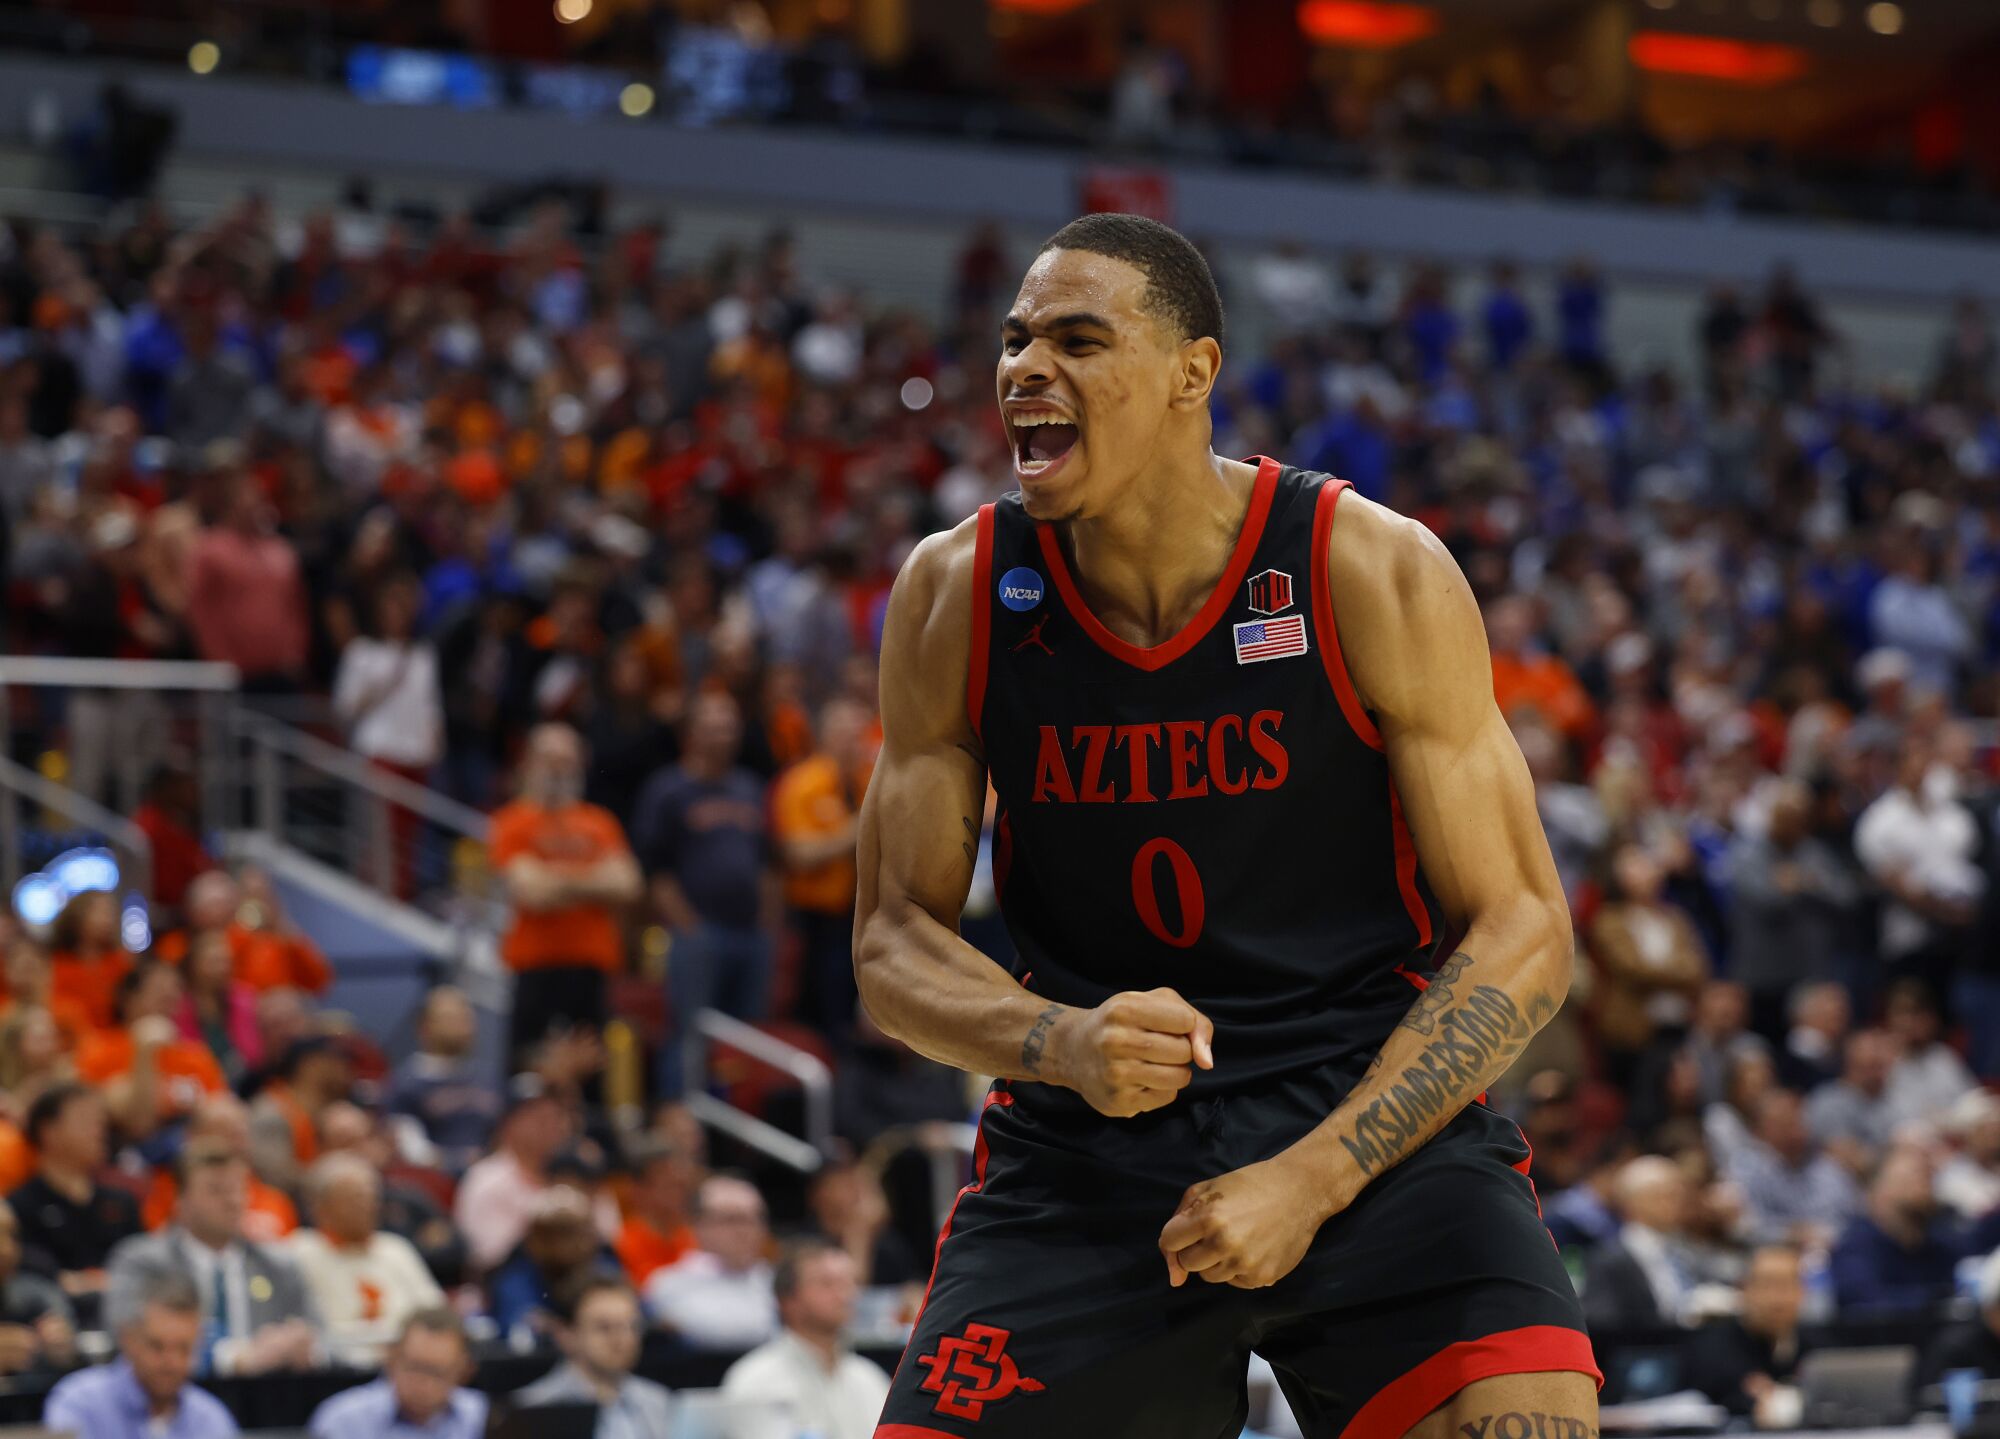 San Diego State's Keshad Johnson celebrates during a win against Alabama in a Sweet 16 game.